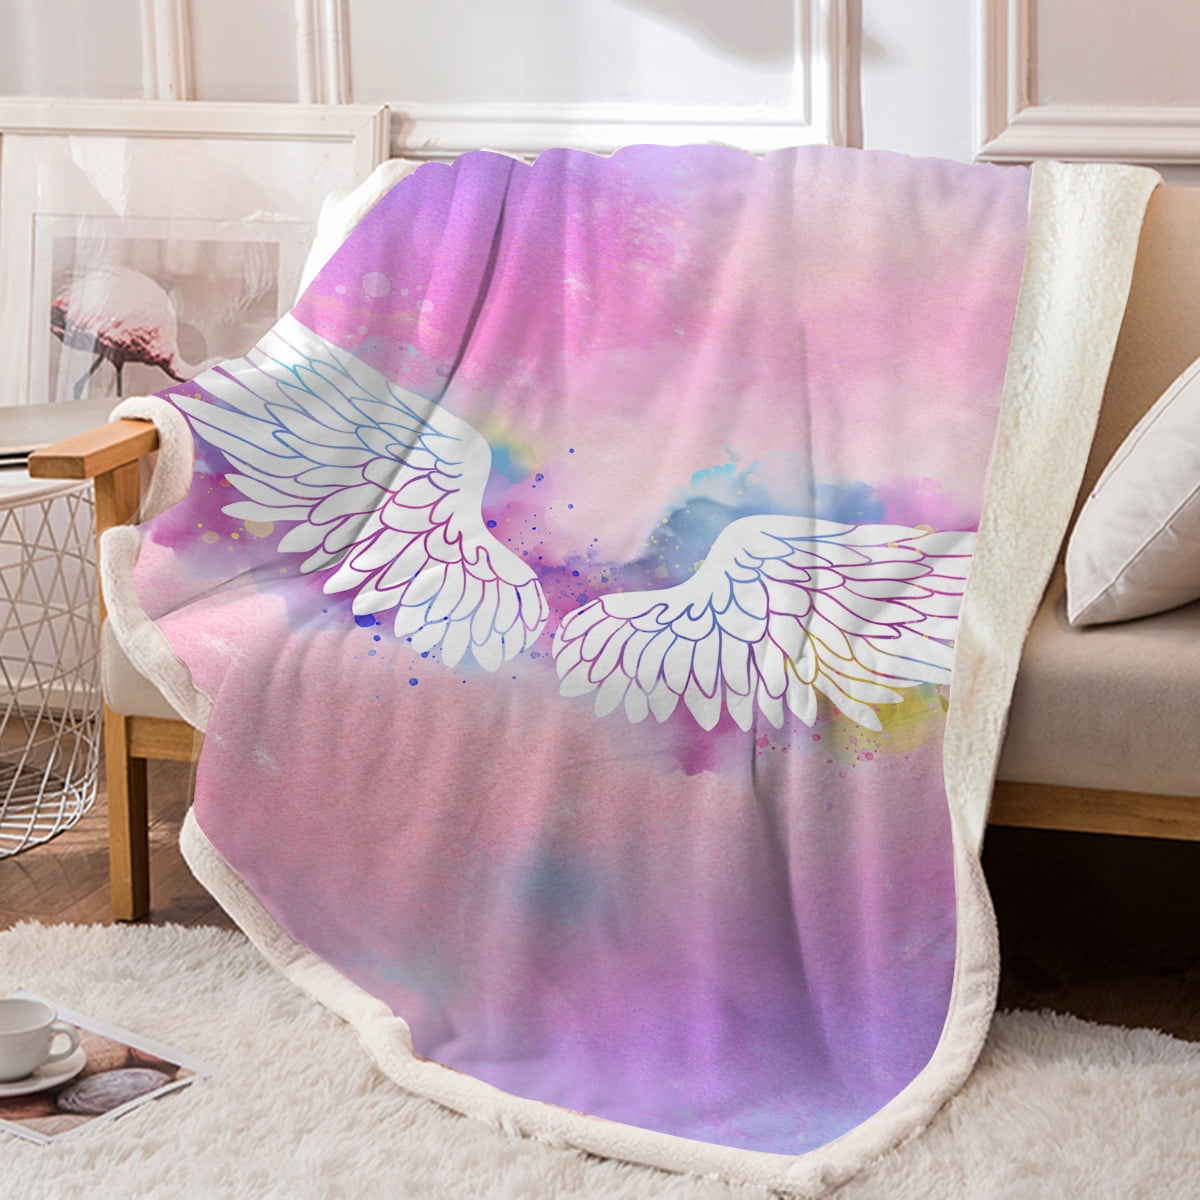 Qualet an Angel and A Demon Ultra-Soft Micro Fleece Blanket Home Decor Throw Lightweight for Couch Bed Sofa 50X40